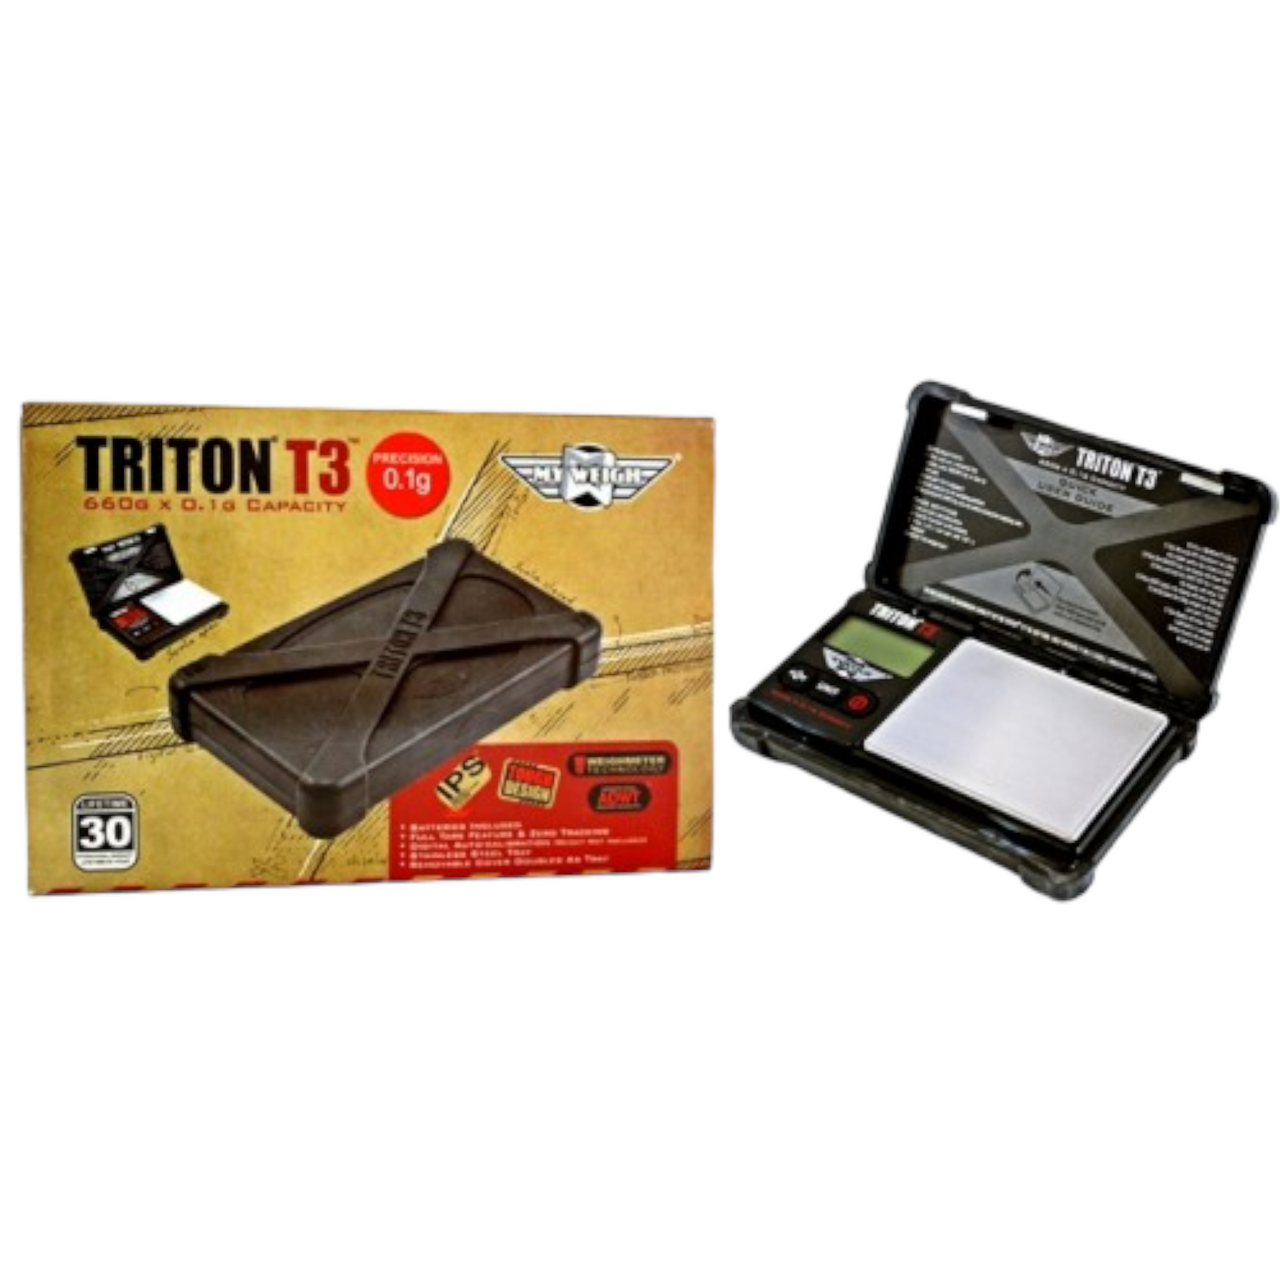 https://cdn11.bigcommerce.com/s-rqsas1jgyl/images/stencil/1280x1280/products/3114/2006/My-Weigh-Scale-660G-Triton-T3-0-1G__25923.1696114748.png?c=1&imbypass=on